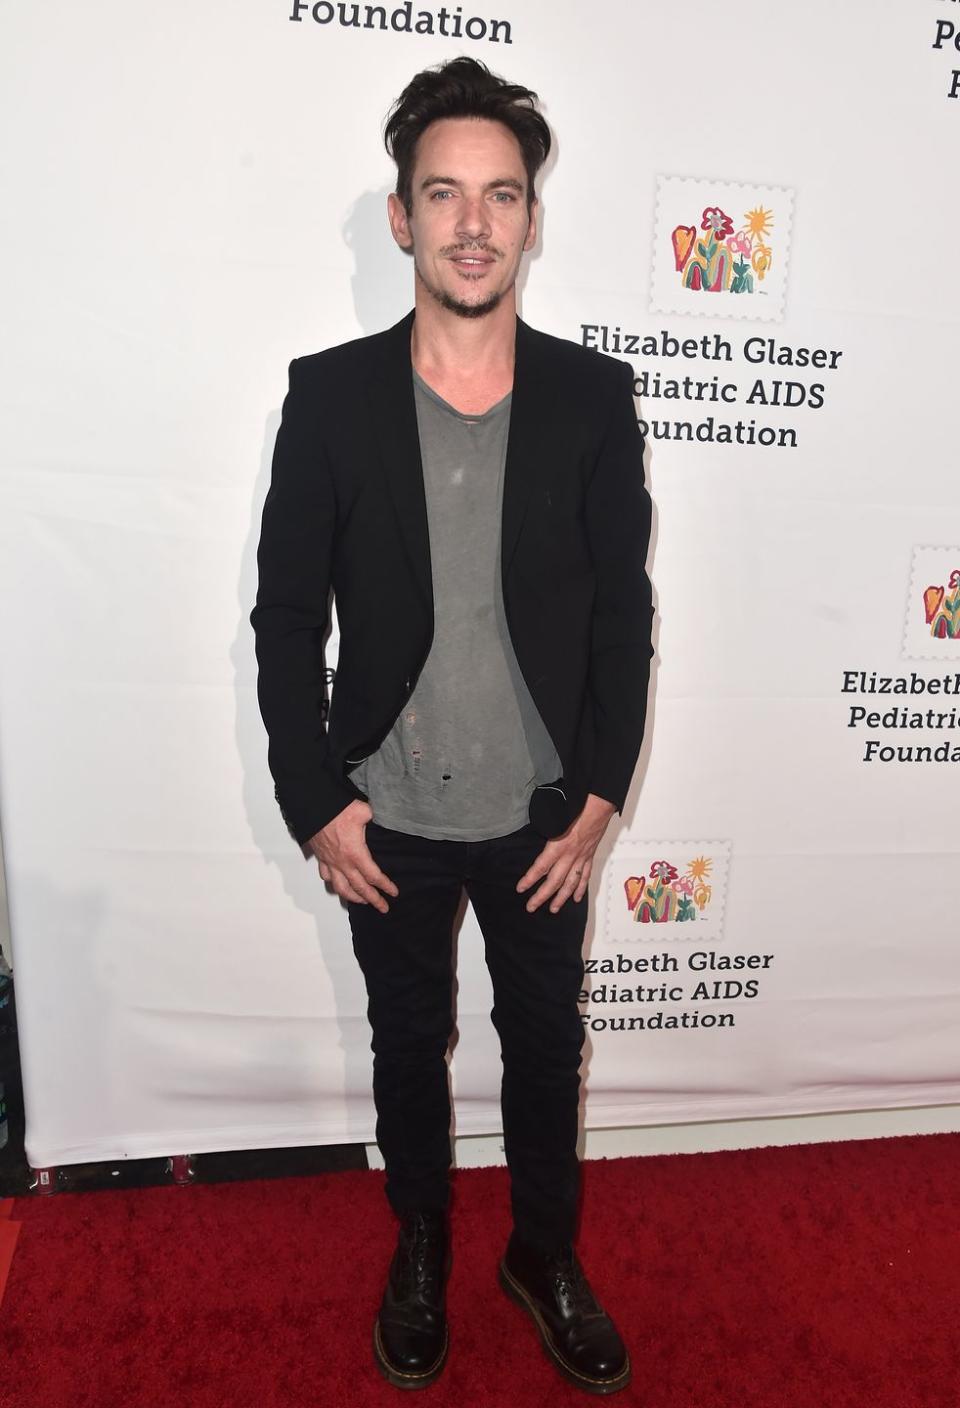 <p>Yet another Dubliner in our midst! Along with a modeling career, Rhys Meyers is most famous for appearing in projects such as <em>The Tudors</em>, <em>Elvis, </em>and <em>Bend It Like Beckham.</em></p>